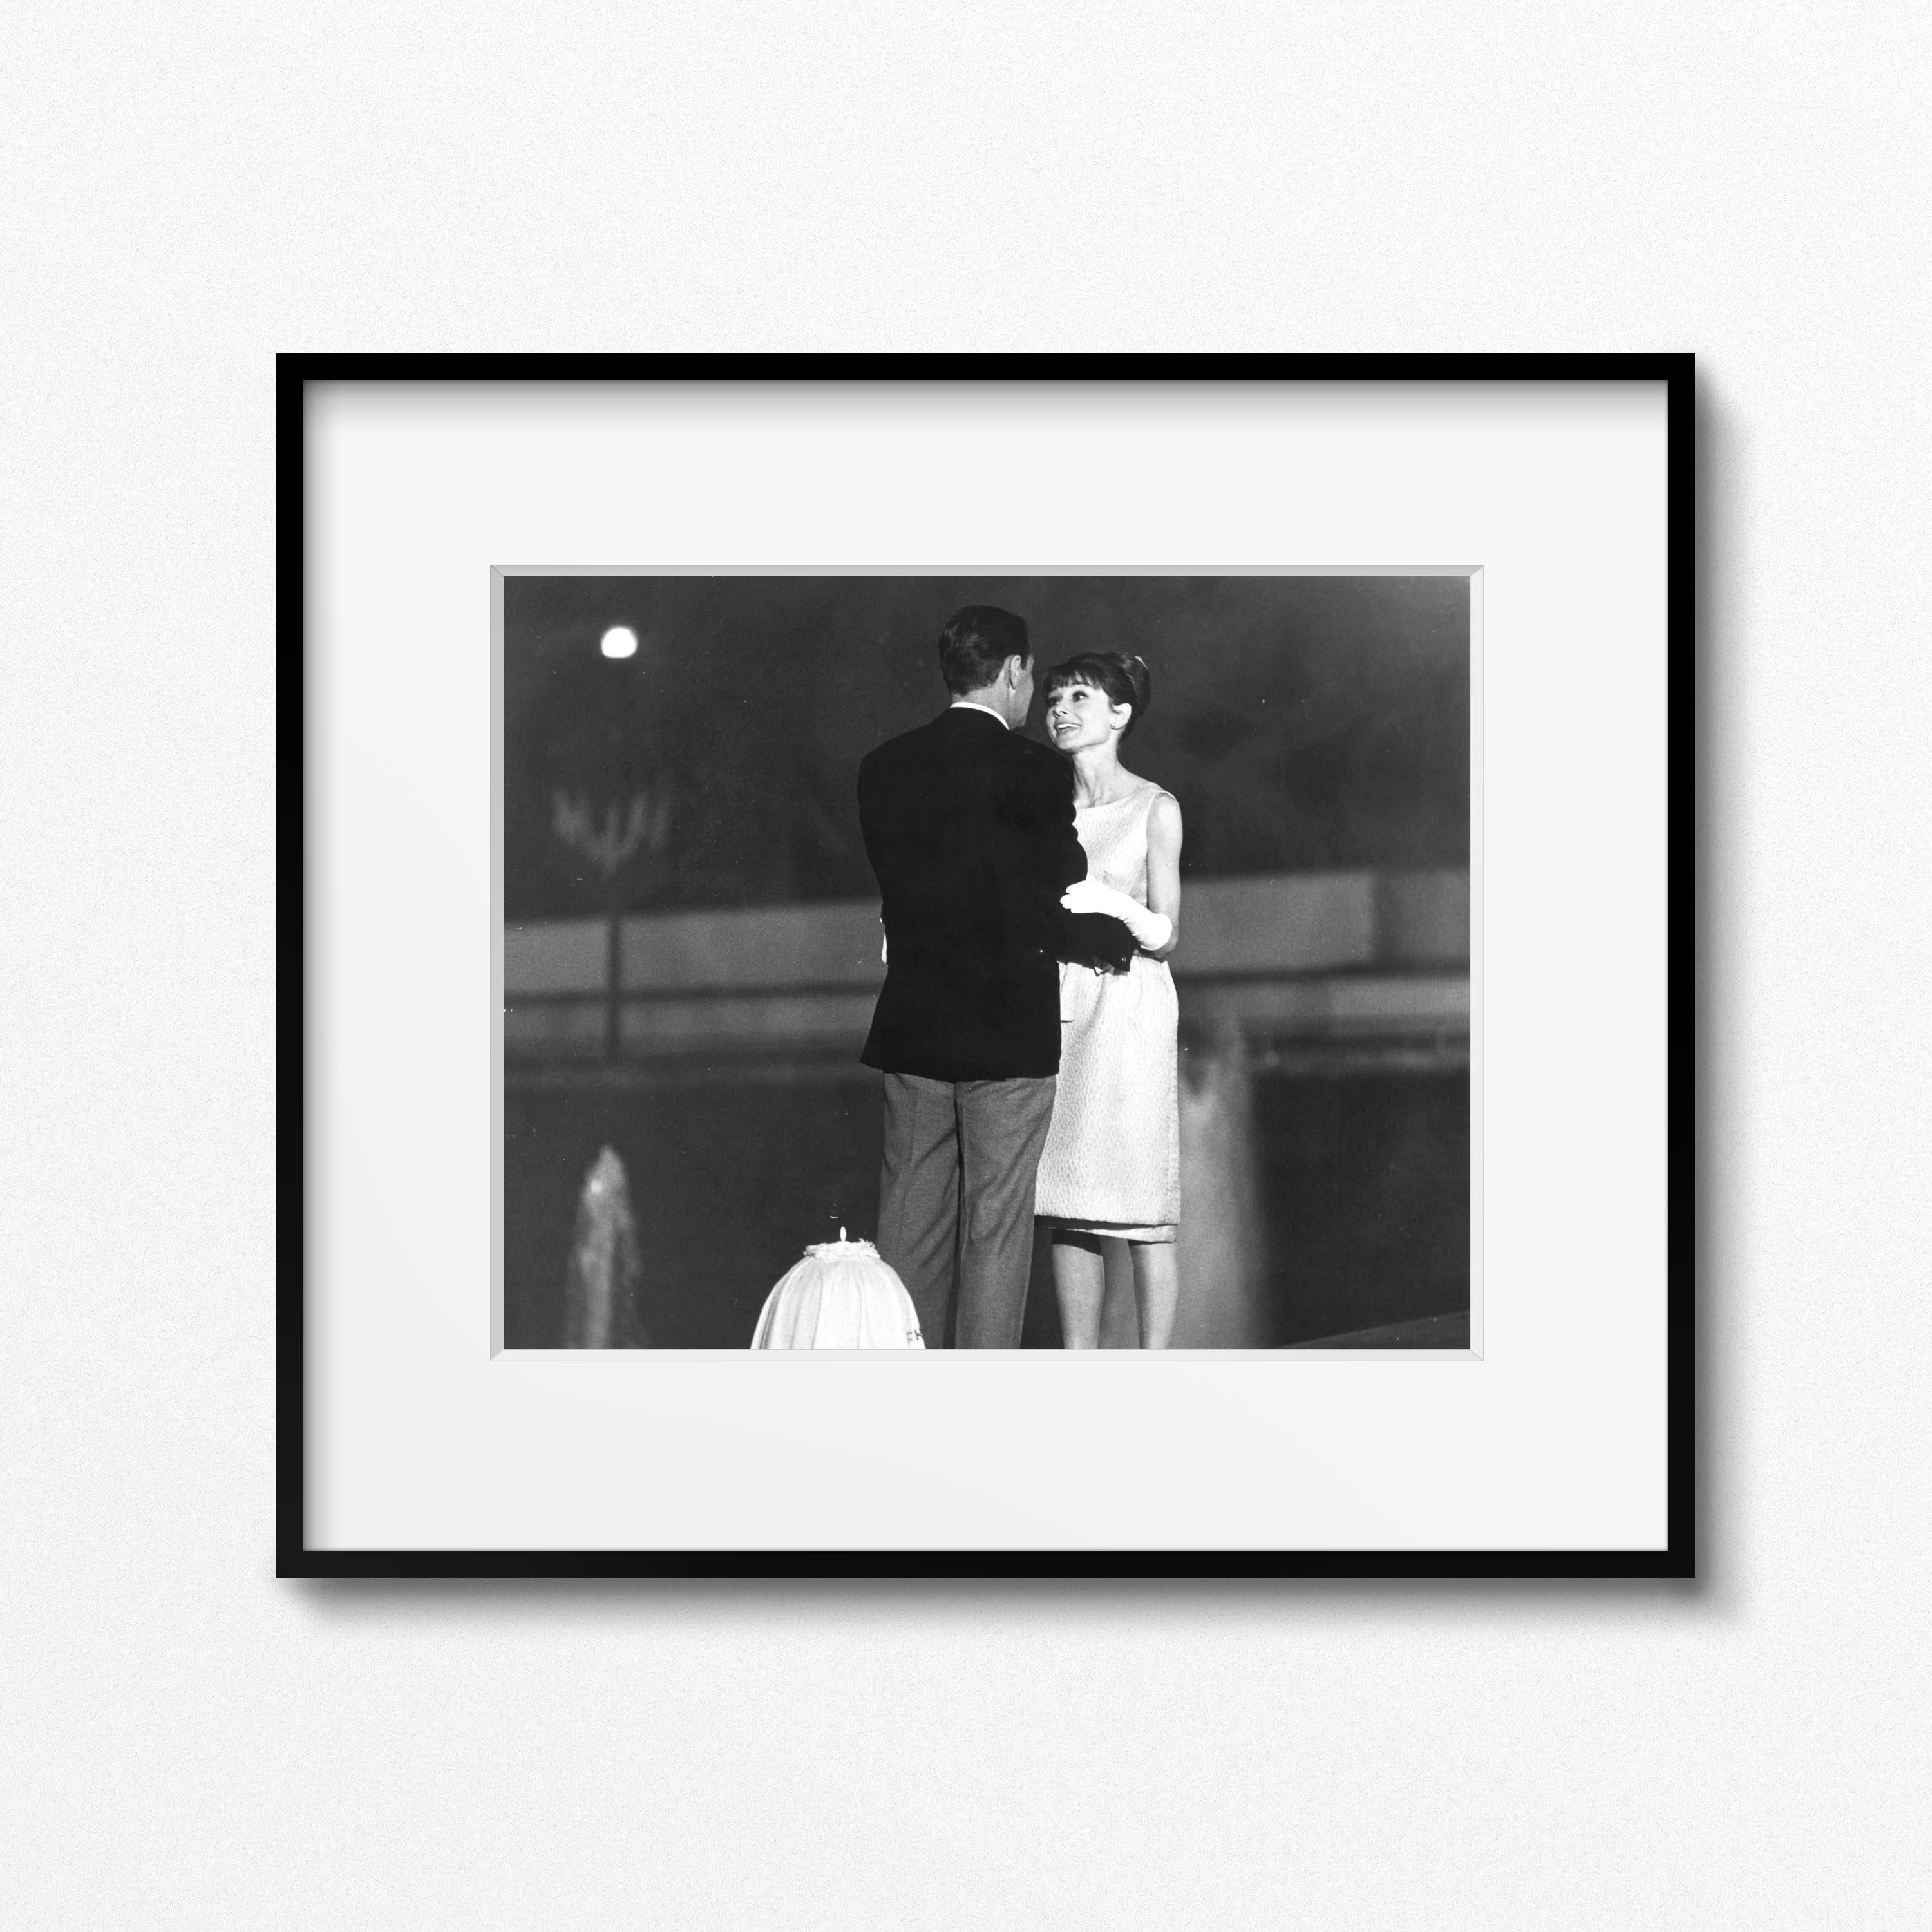 From the Personal collection of Audrey Hepburn

Audrey Hepburn and William Holden on the set of 'Paris When it Sizzles,' Paris, 1962 by Vincent Rossell
Vintage gelatin silver print
Photographer's credit stamp, Audrey Hepburn collection stamp and